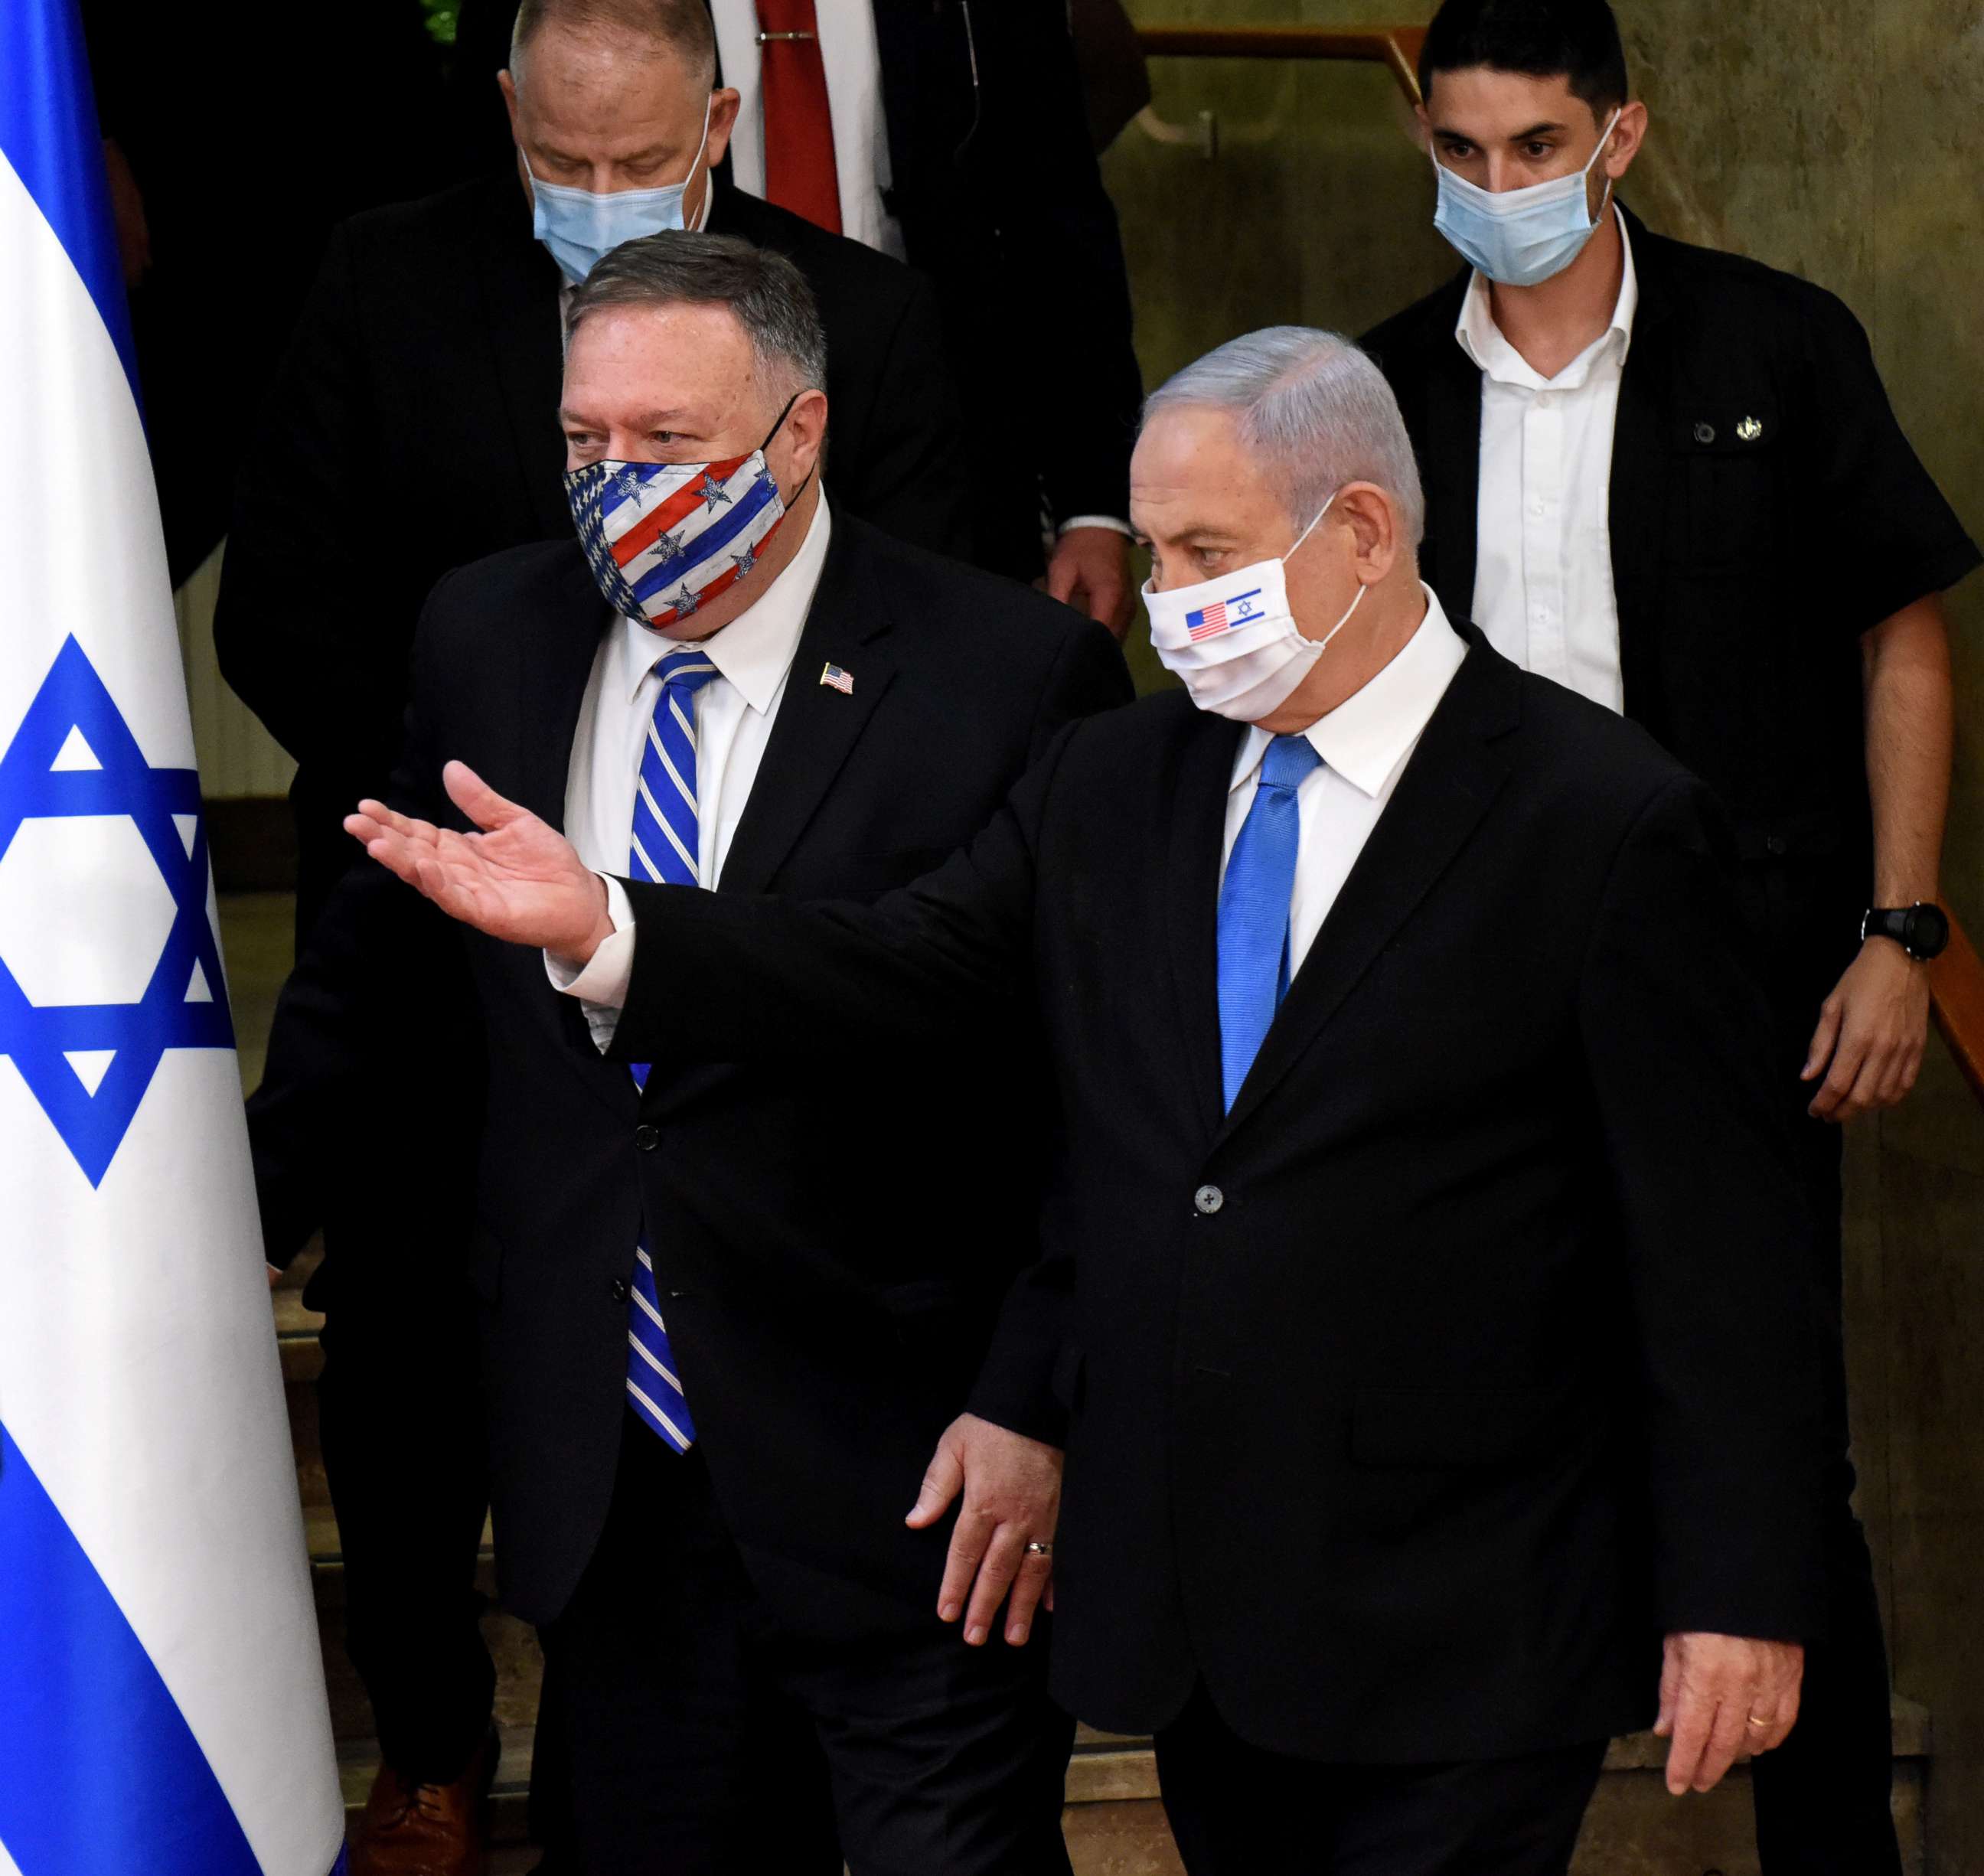 PHOTO: Secretary of State Mike Pompeo and Israeli Prime Minister Benjamin Netanyahu arrive for a joint news conference in Jerusalem, Aug. 24, 2020.